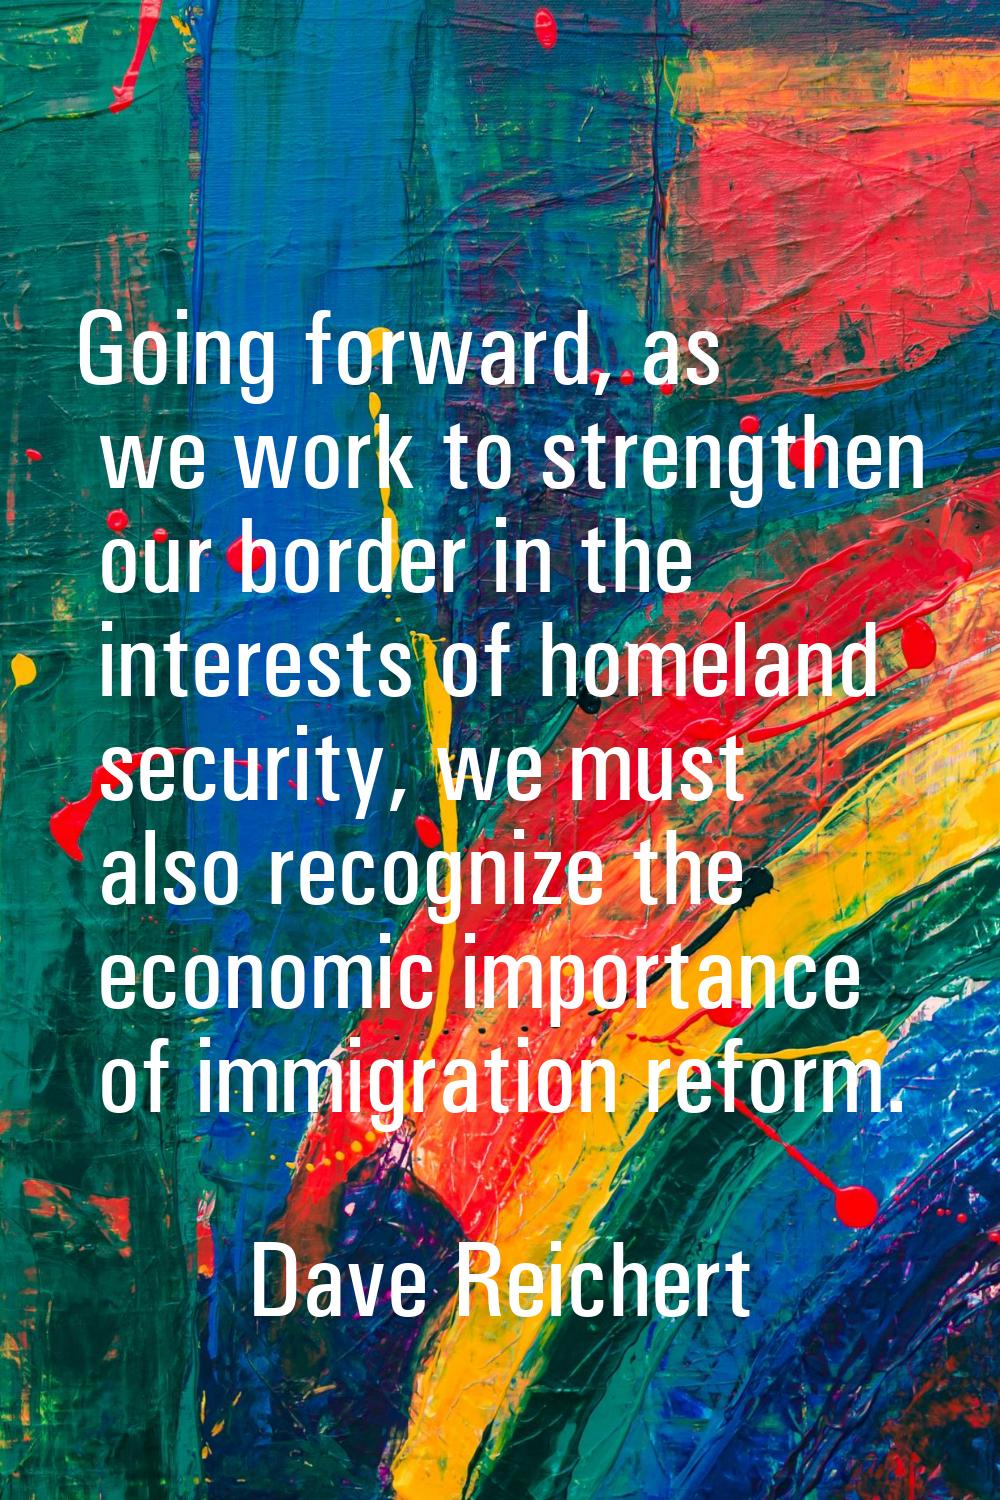 Going forward, as we work to strengthen our border in the interests of homeland security, we must a